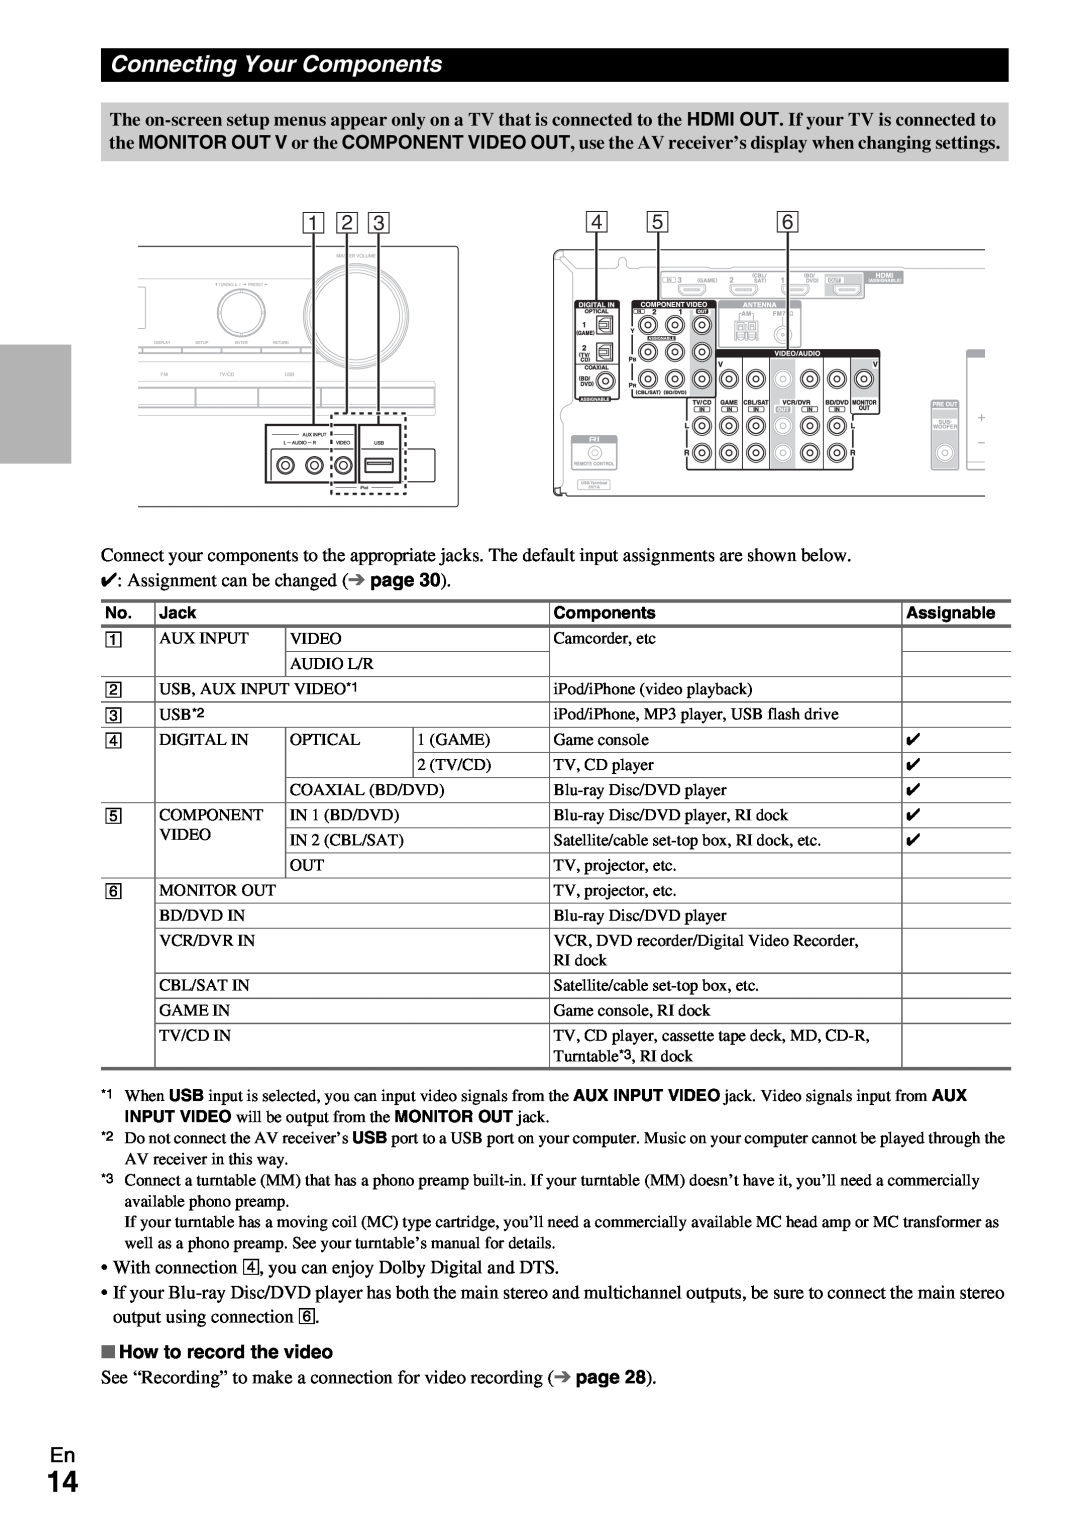 Onkyo HT-RC330 instruction manual Connecting Your Components, A B C D E F, How to record the video 